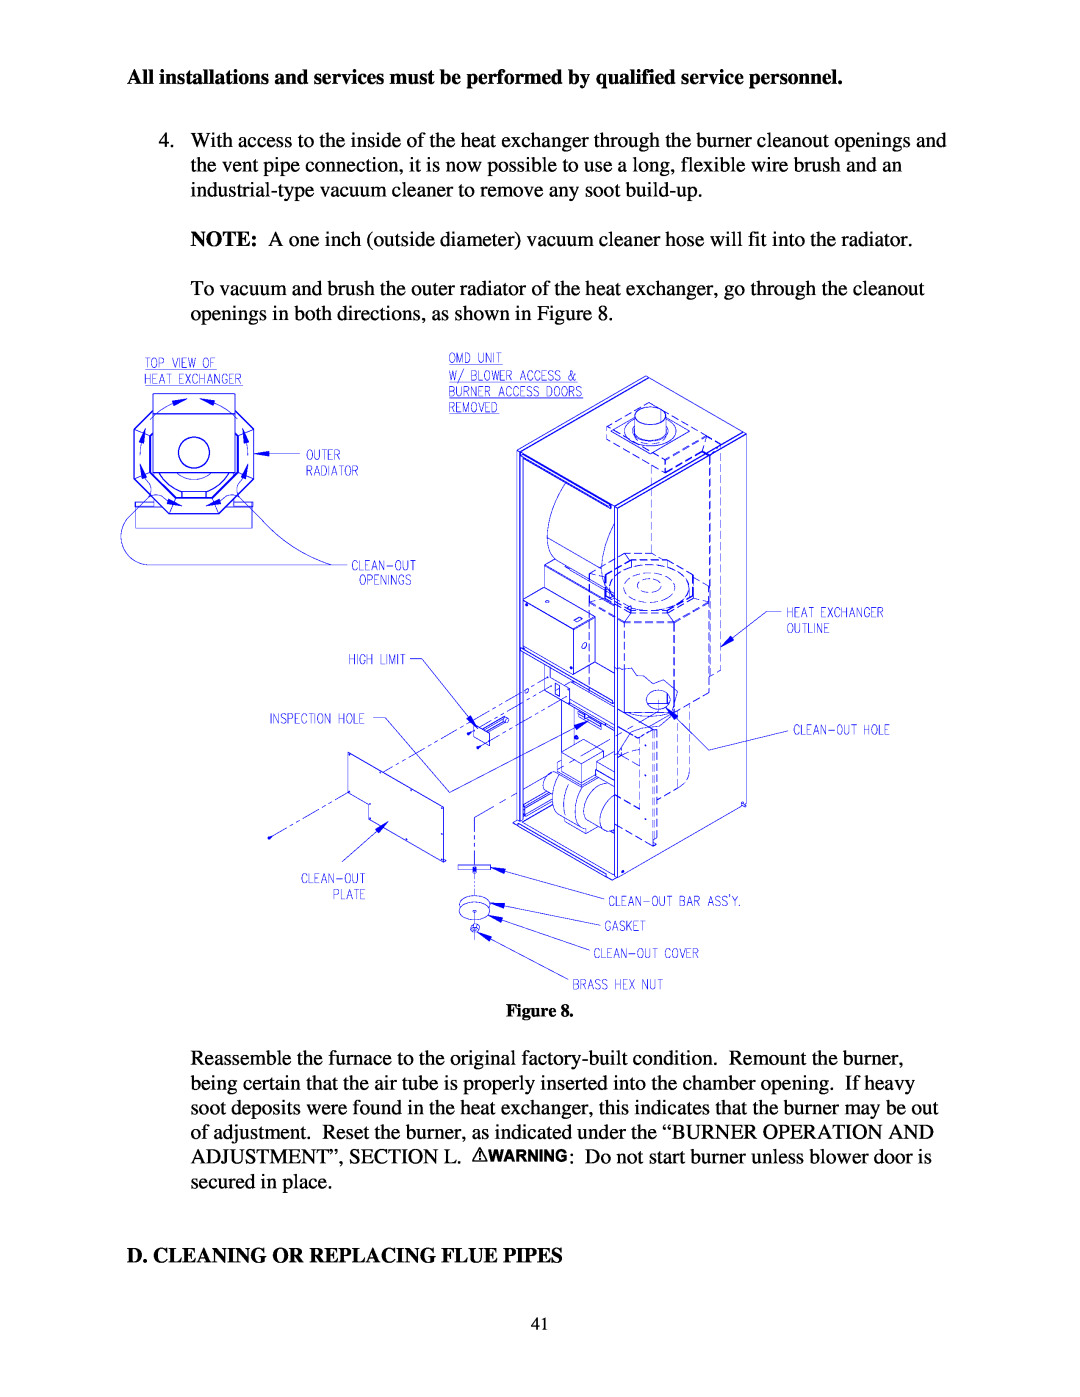 Thermo Products omd-70 service manual D. Cleaning Or Replacing Flue Pipes 